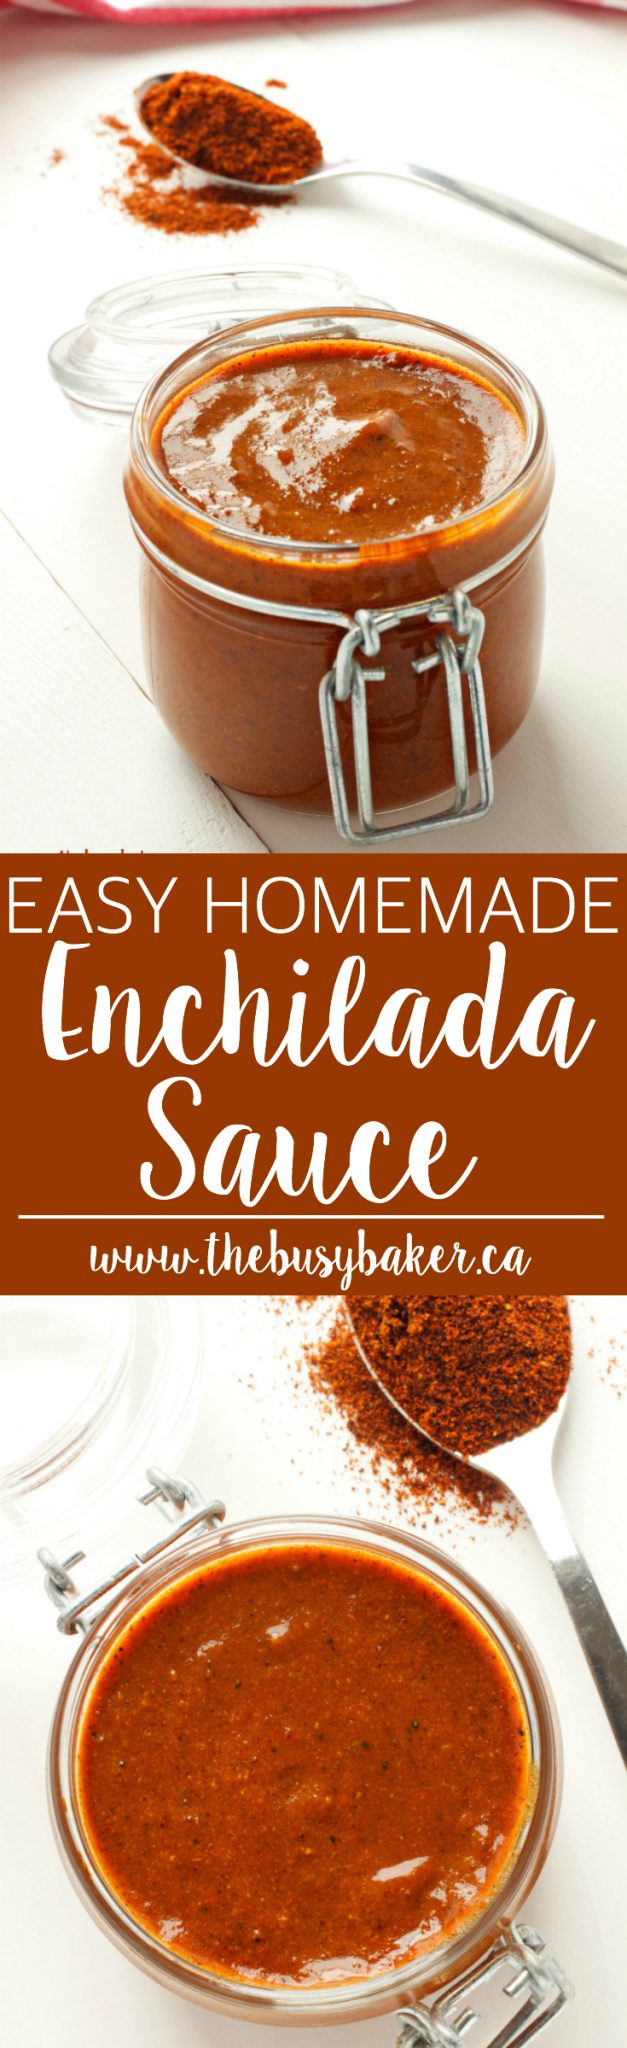 This Easy Homemade Mexican Enchilada Sauce is a super easy recipe made from basic pantry staples! Recipe from thebusybaker.ca via @busybakerblog